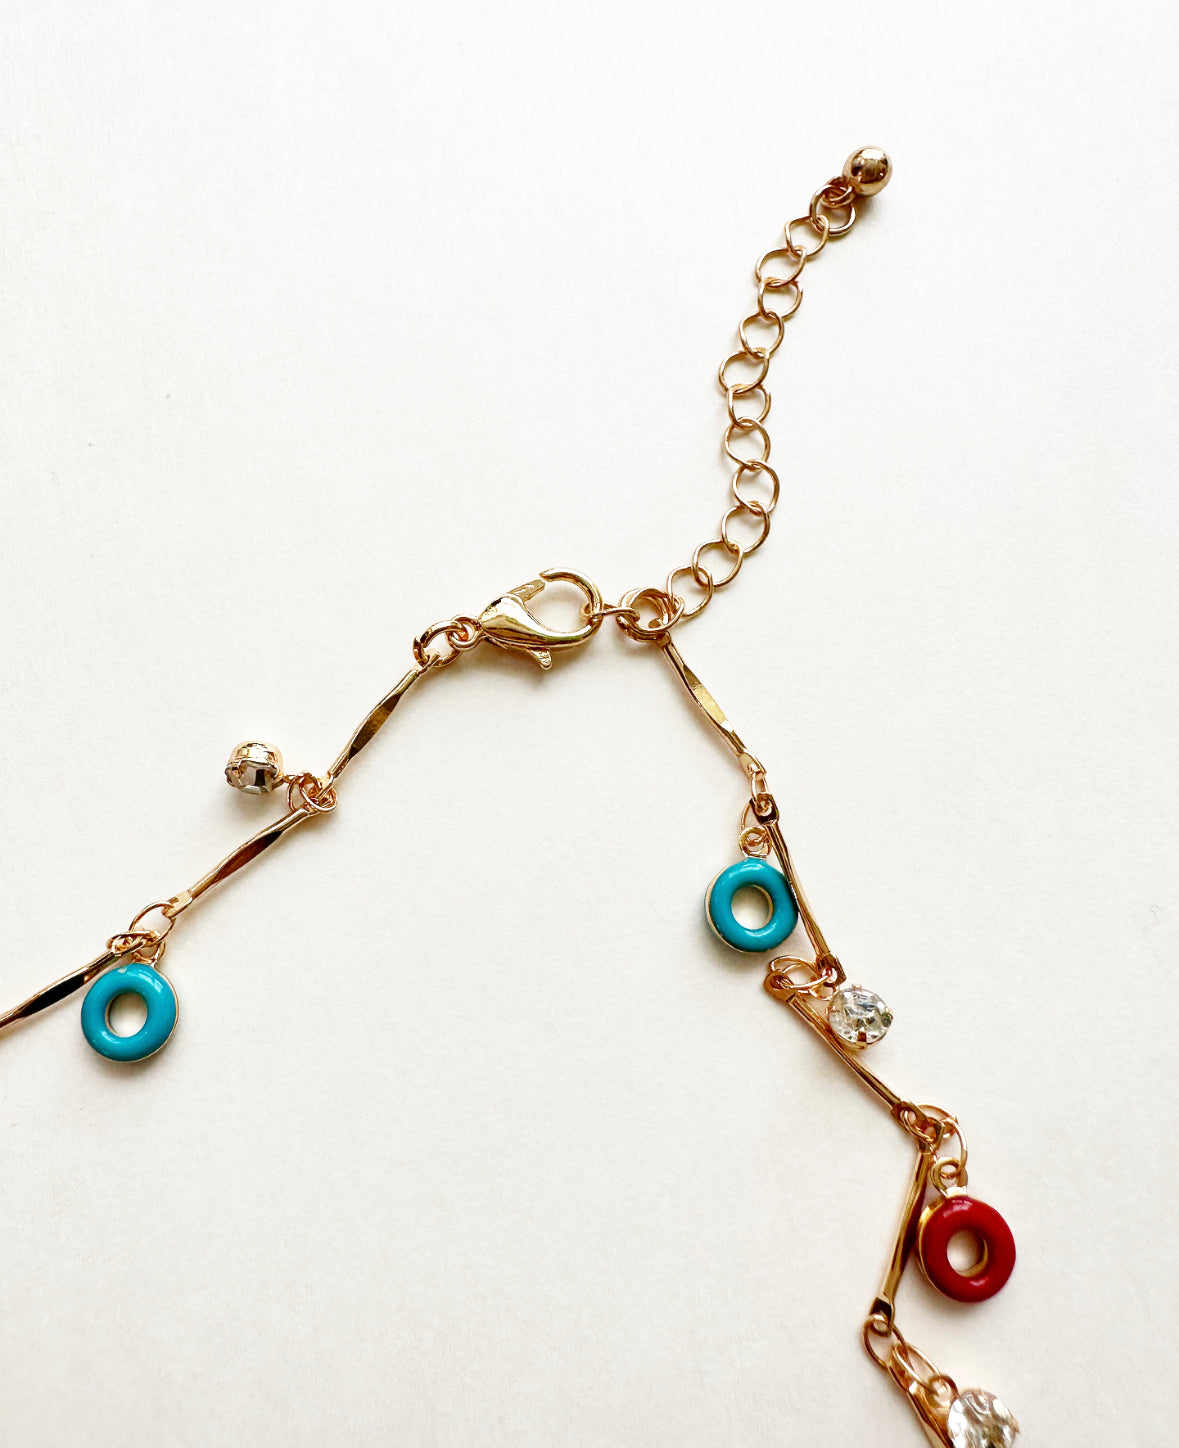 Close-up of lobster clasp and 2-inch extender on Confection Choker Necklace.